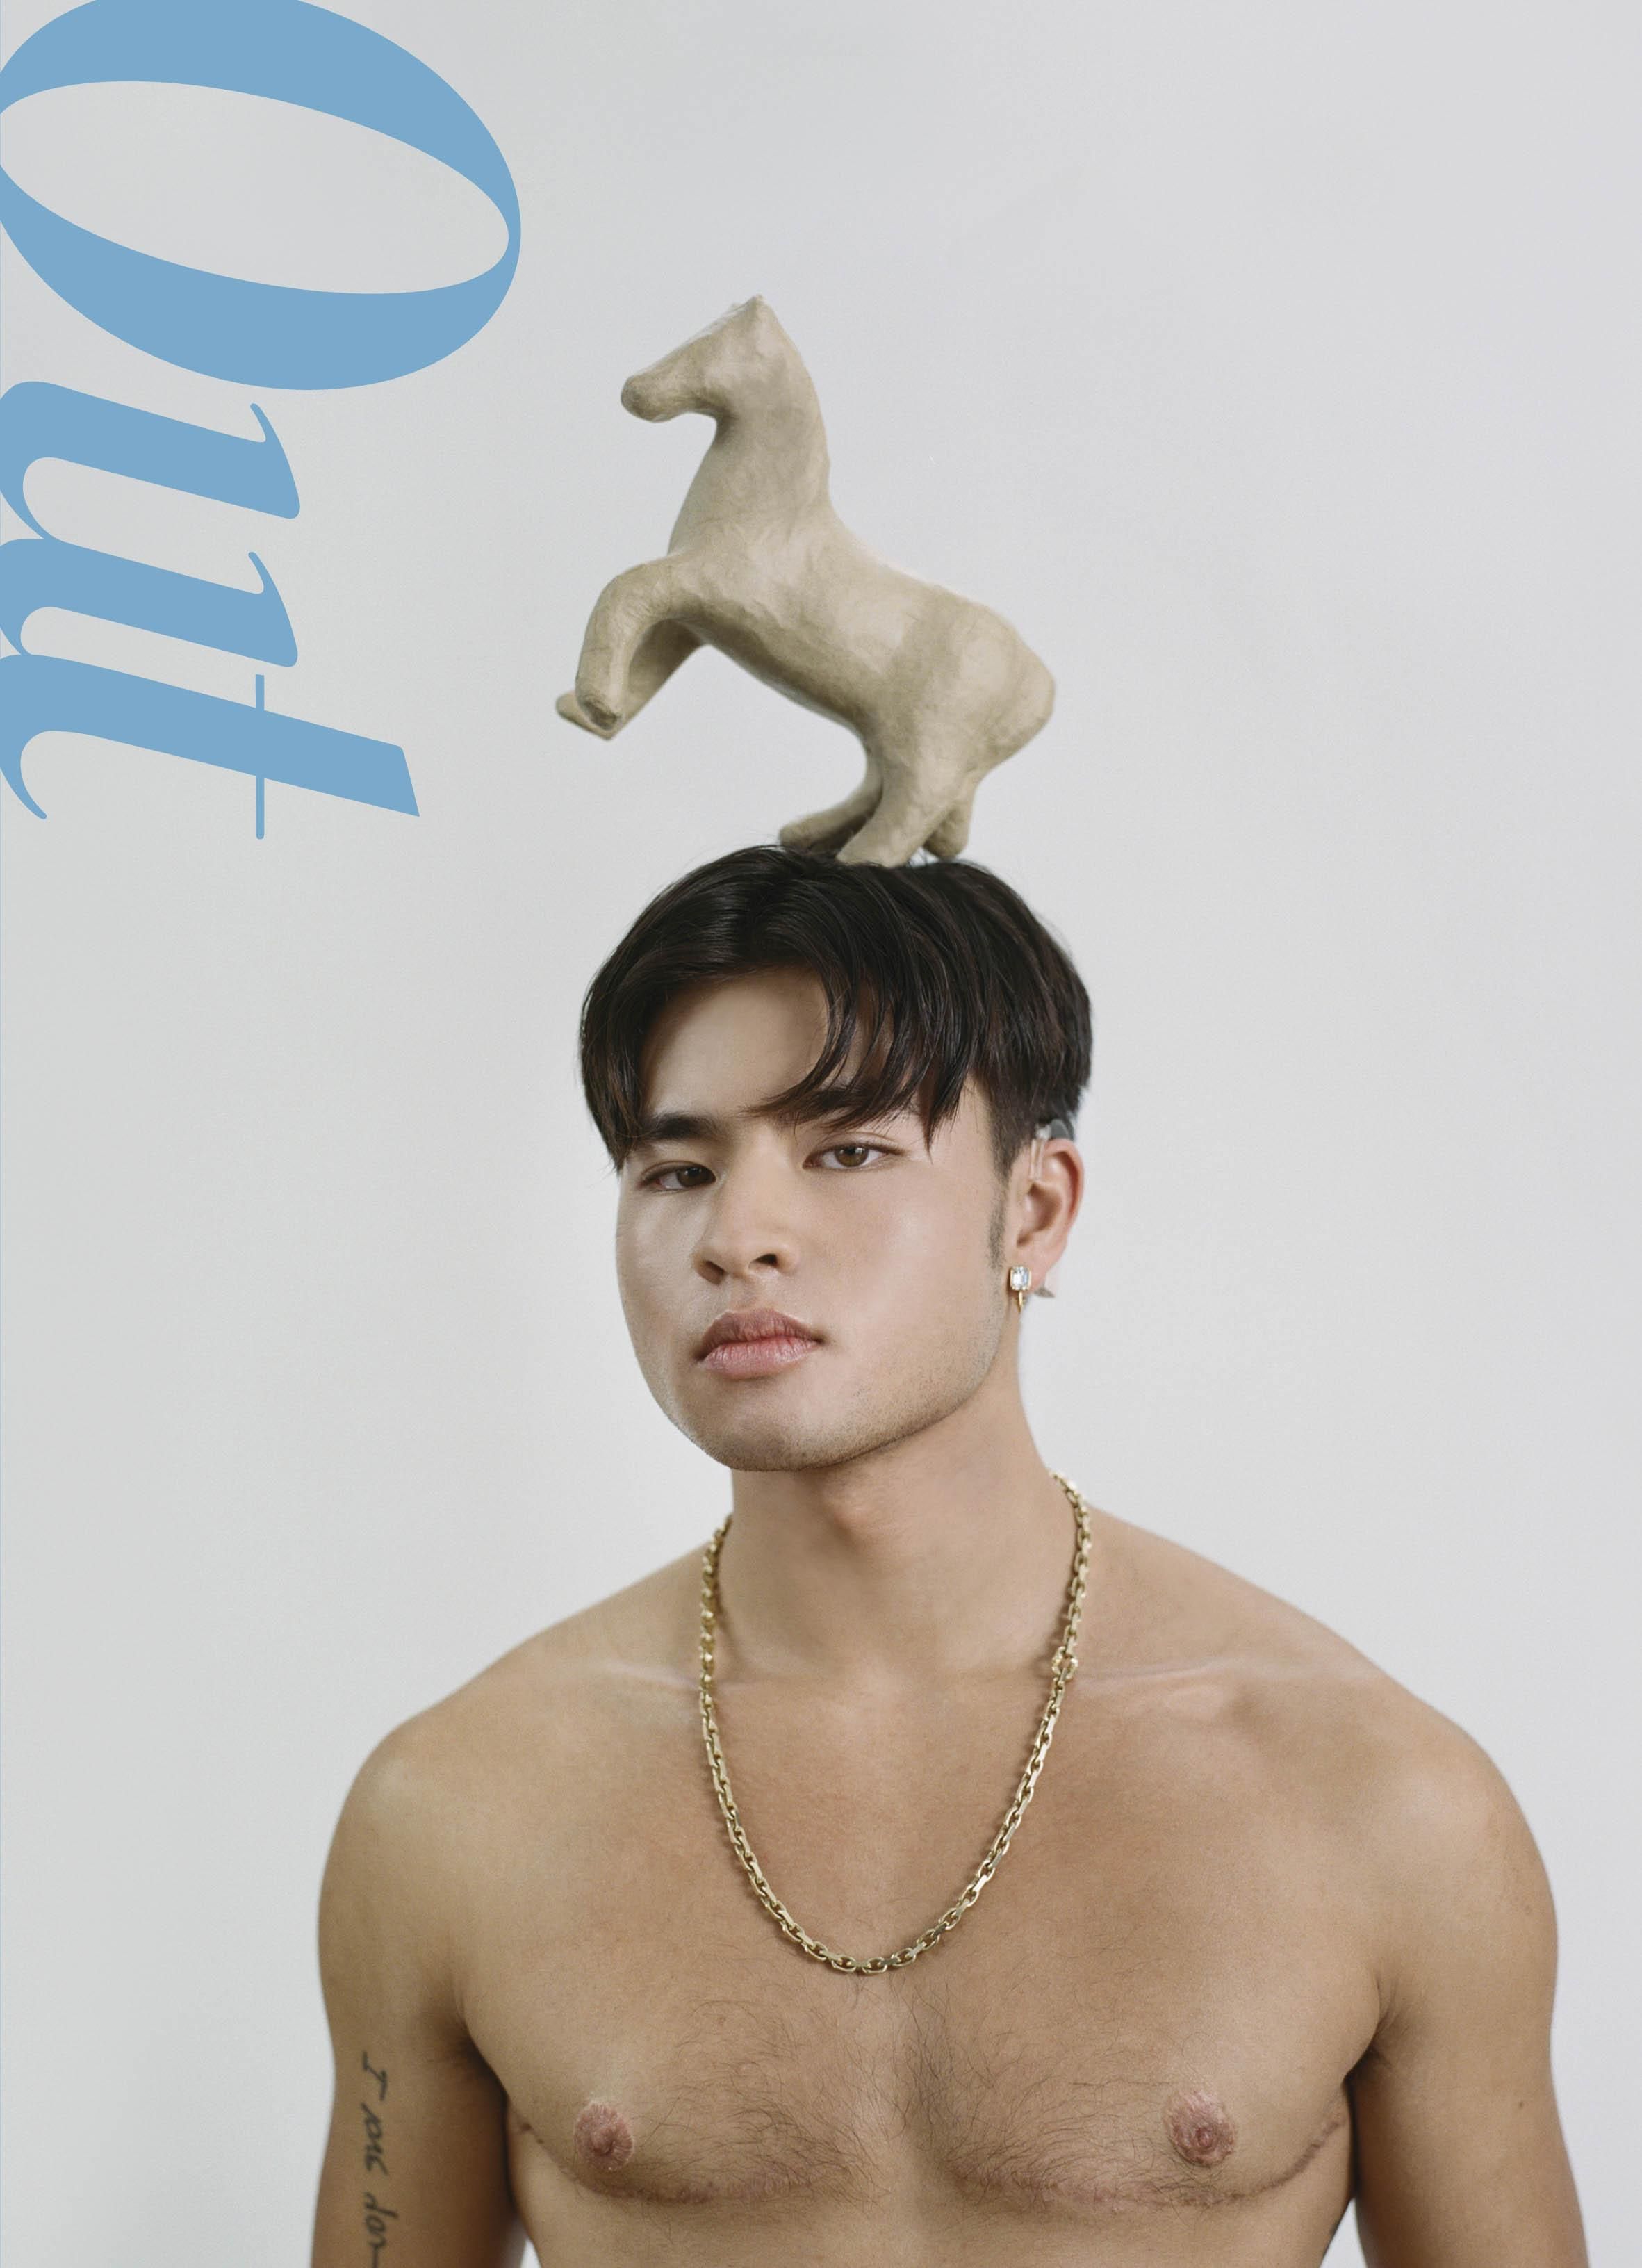 Chella Man on the cover of Out Magazine February 2020